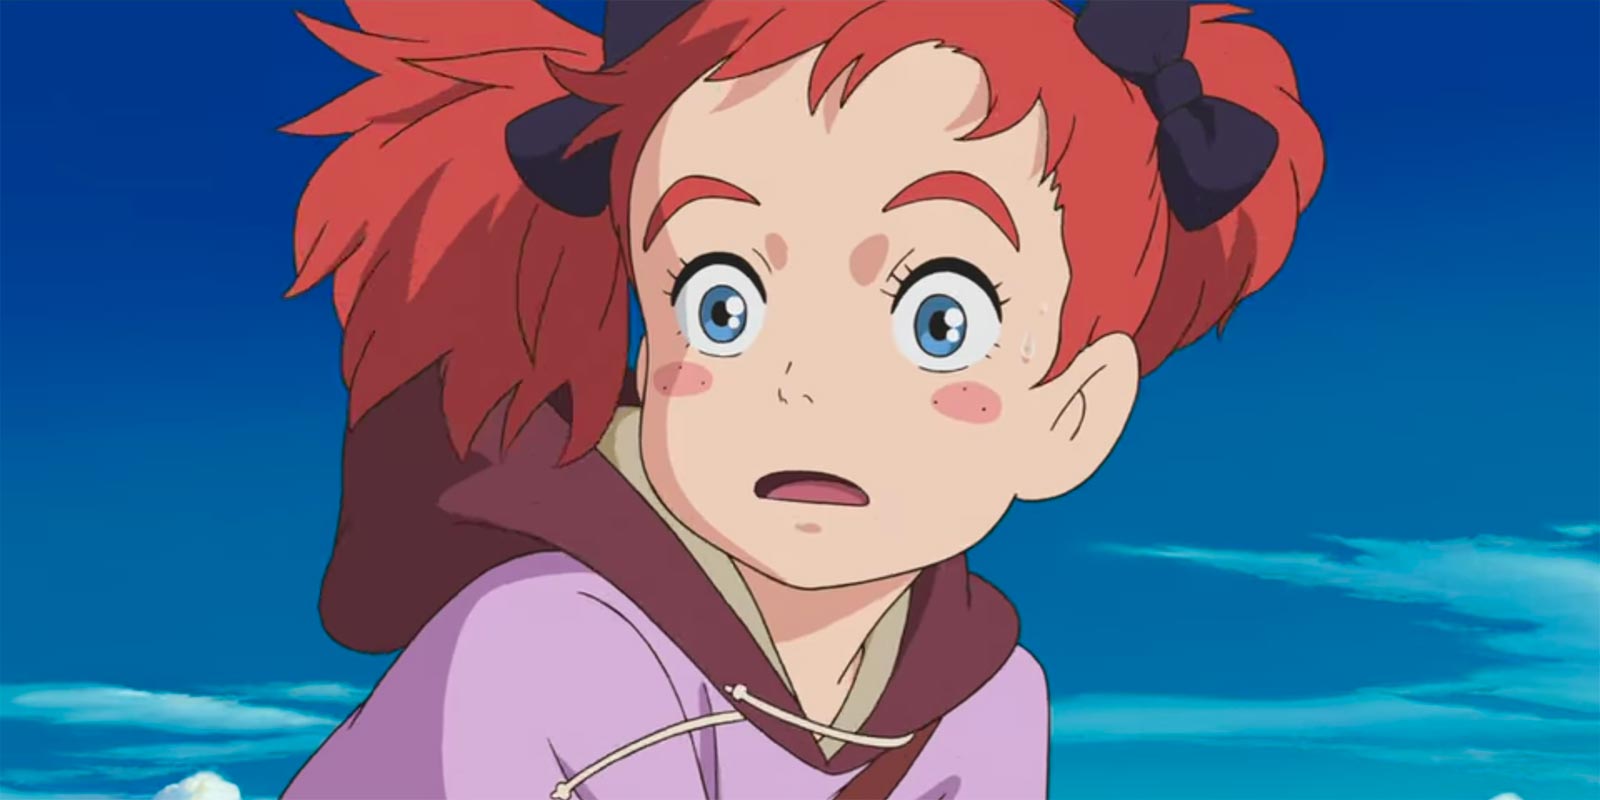 "Mary and the Witch's Flower" Review: Charming Dive Into the Fantastical